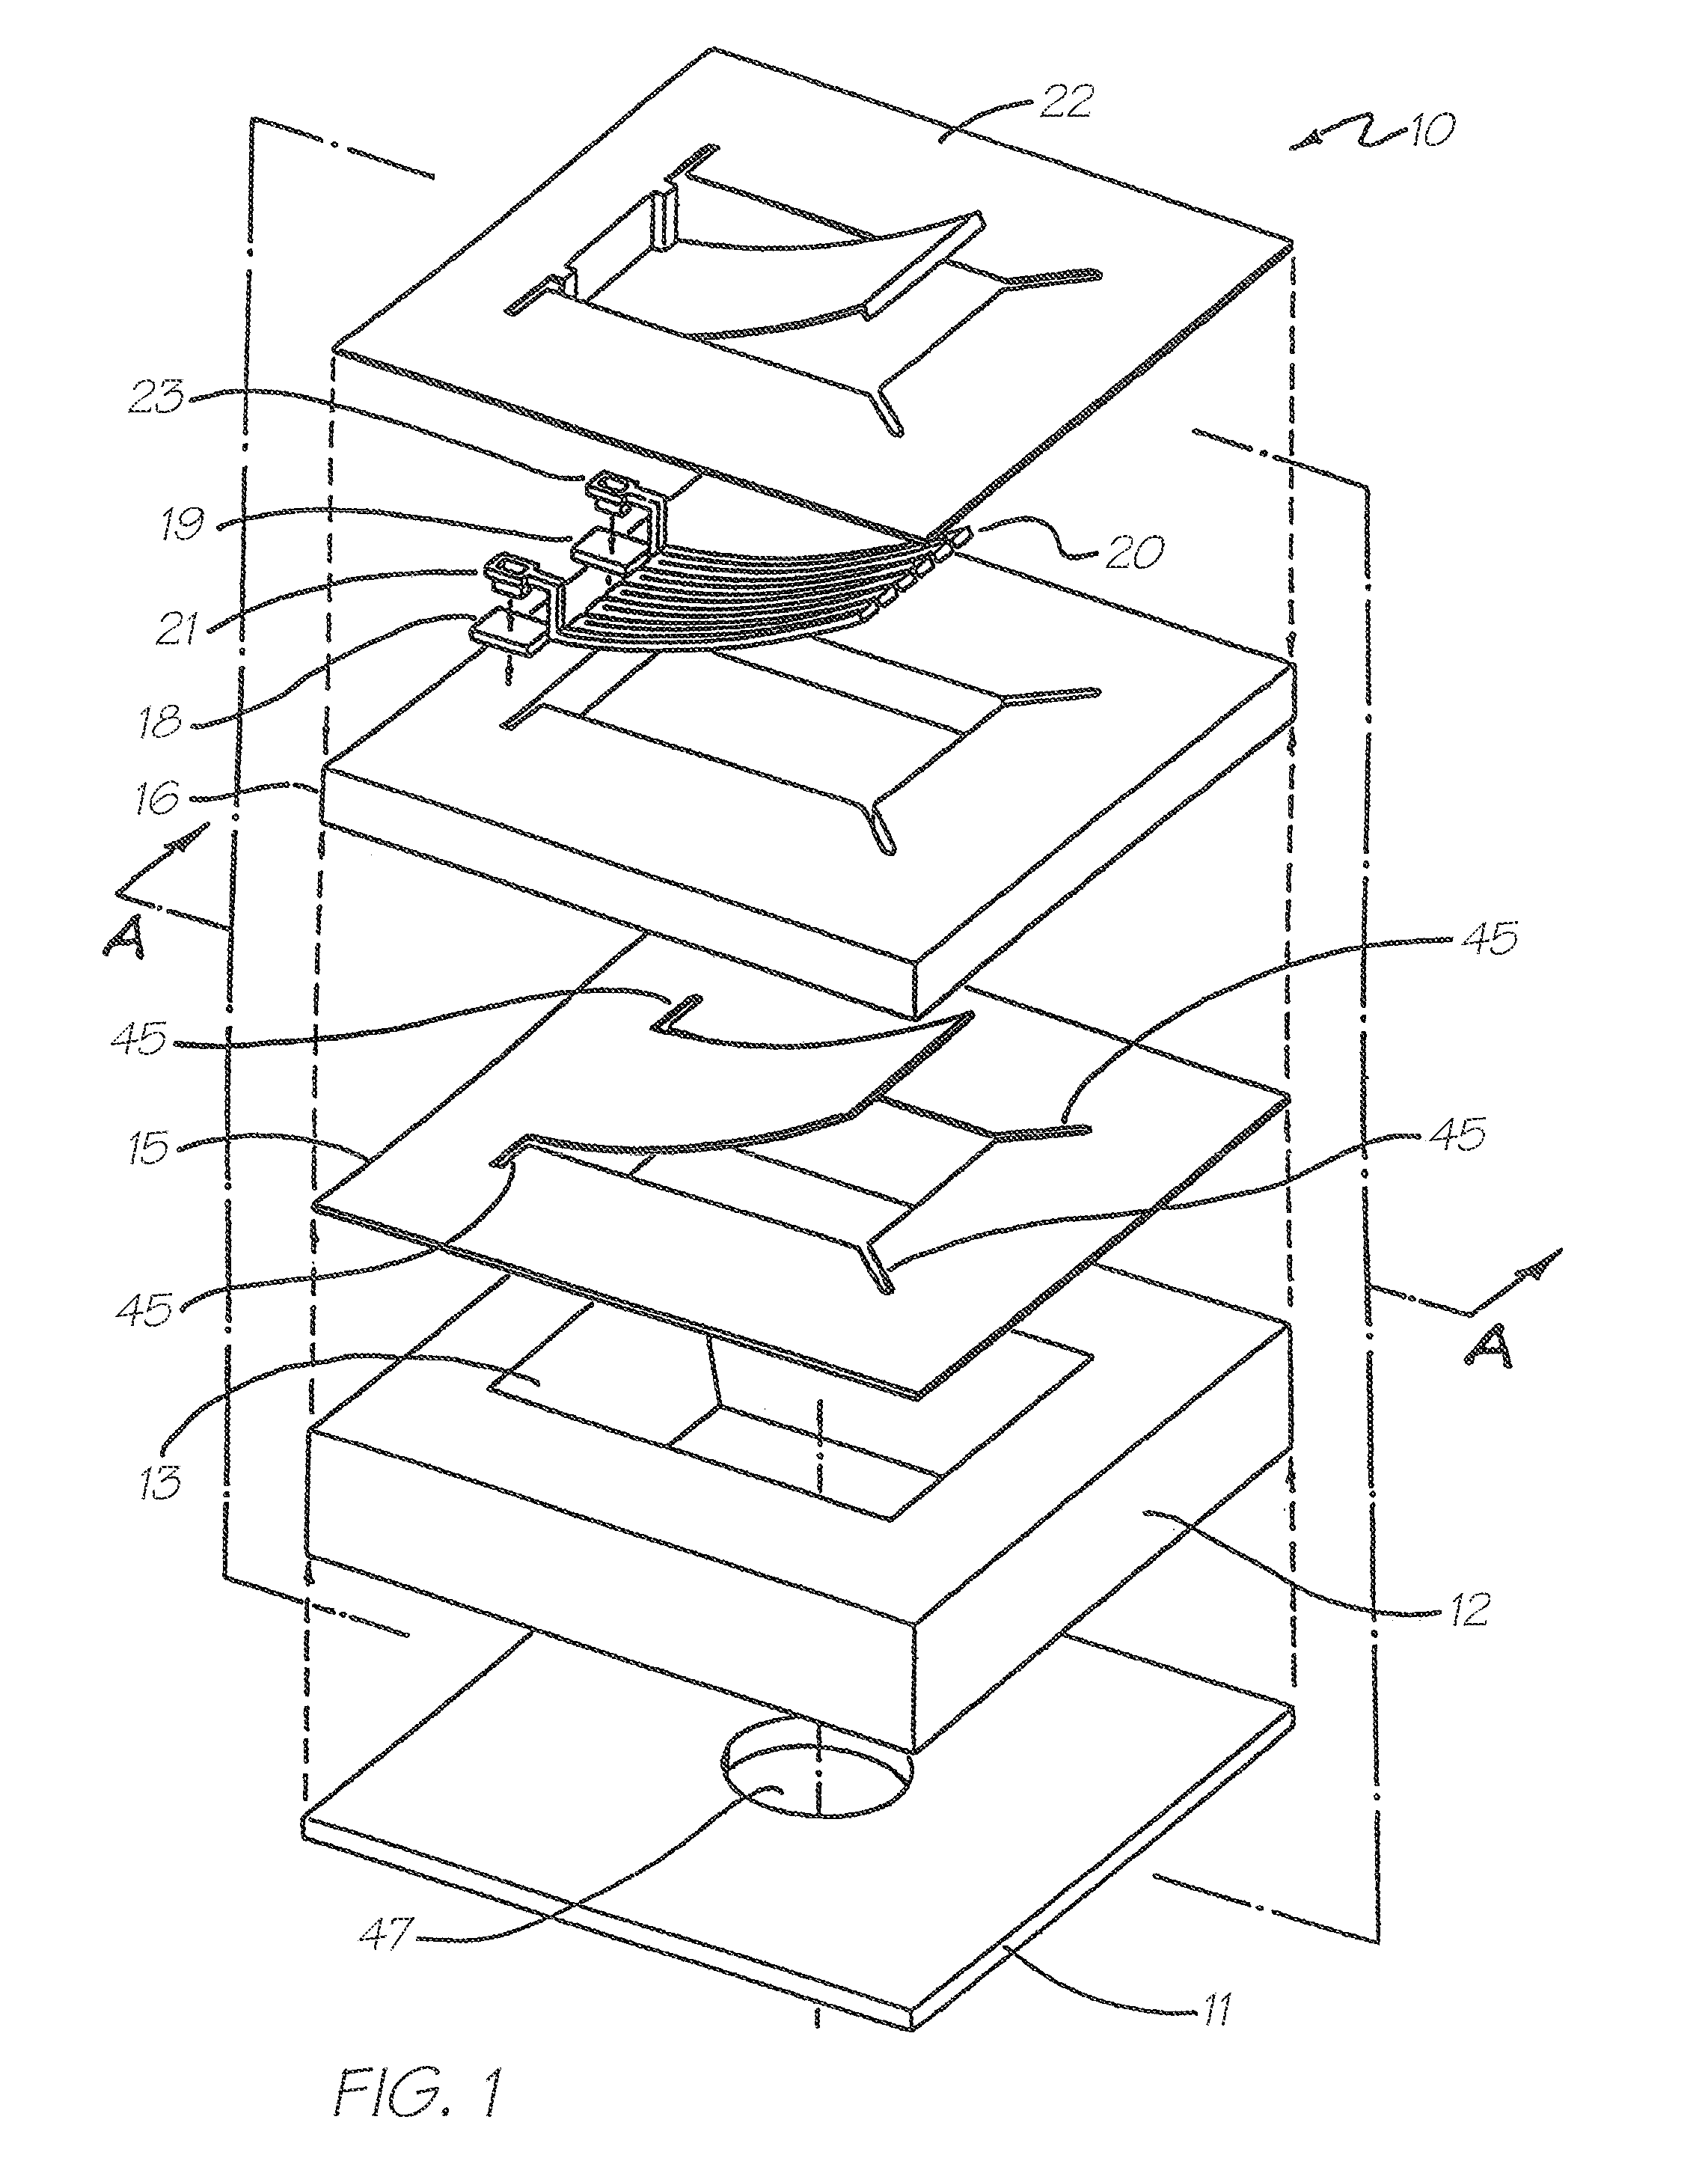 Method of forming printhead by removing sacrificial material through nozzle apertures